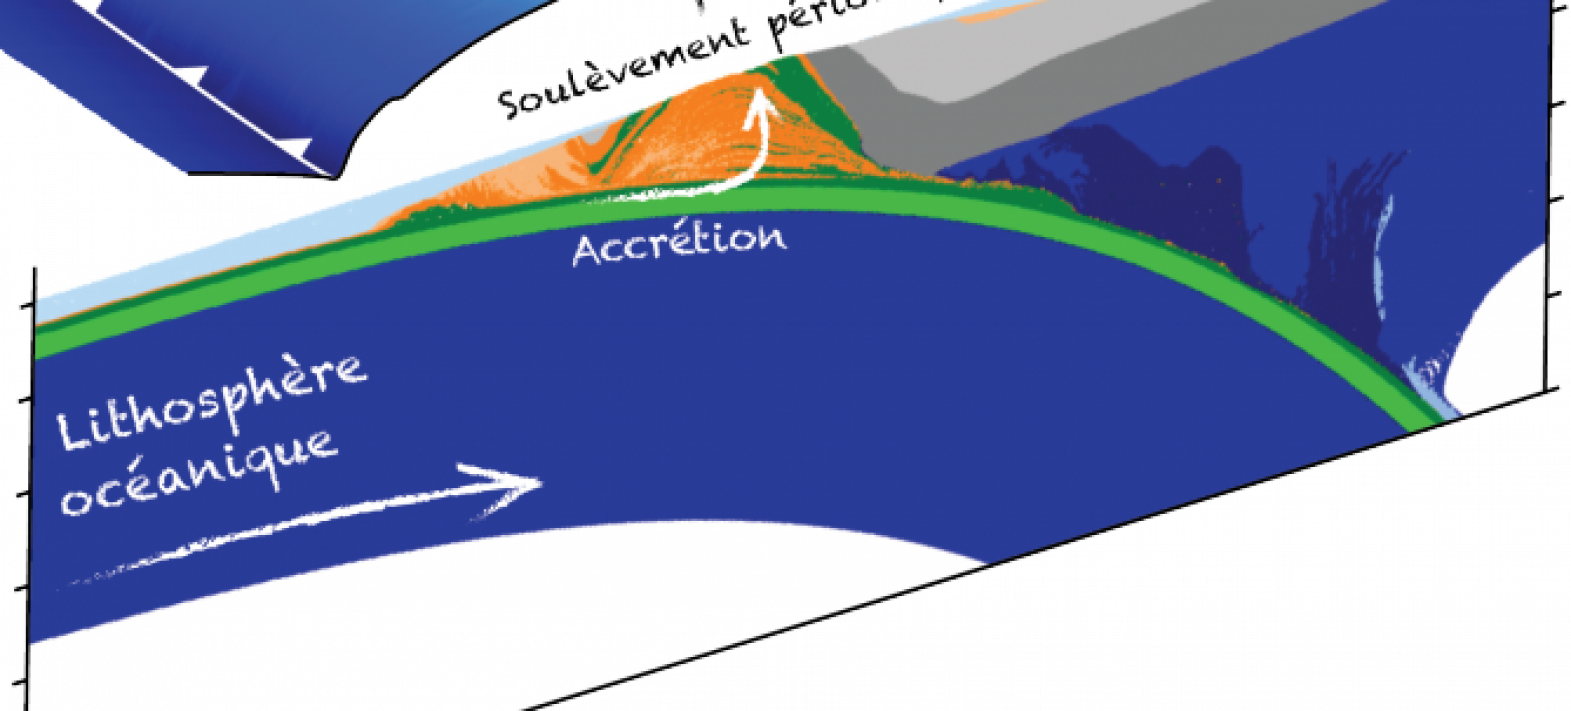 Periodic coastal uplift in a subduction context